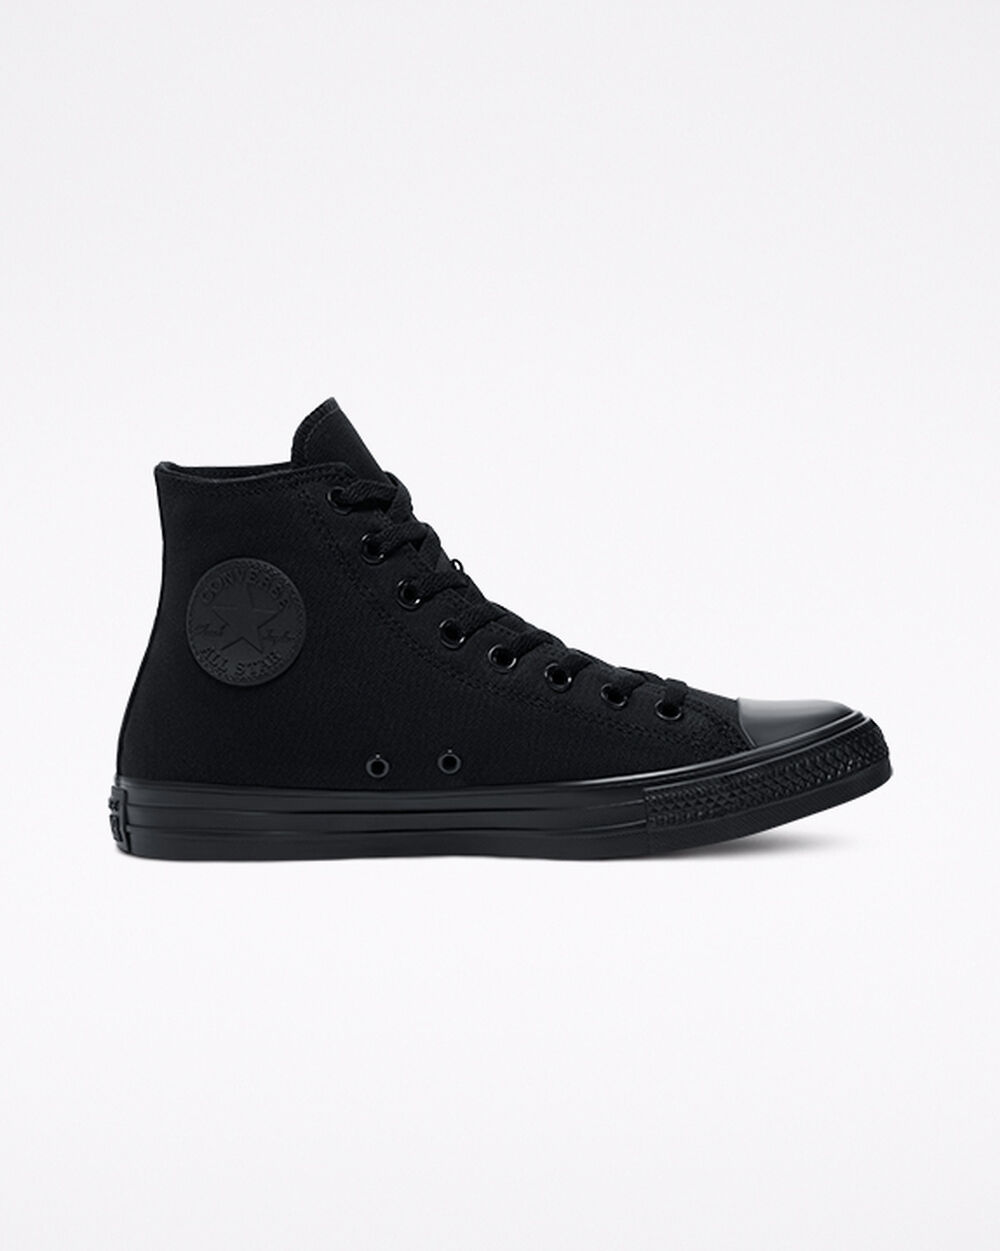 Tenis Converse Chuck Taylor All Star Mujer Negros | Mexico-306726